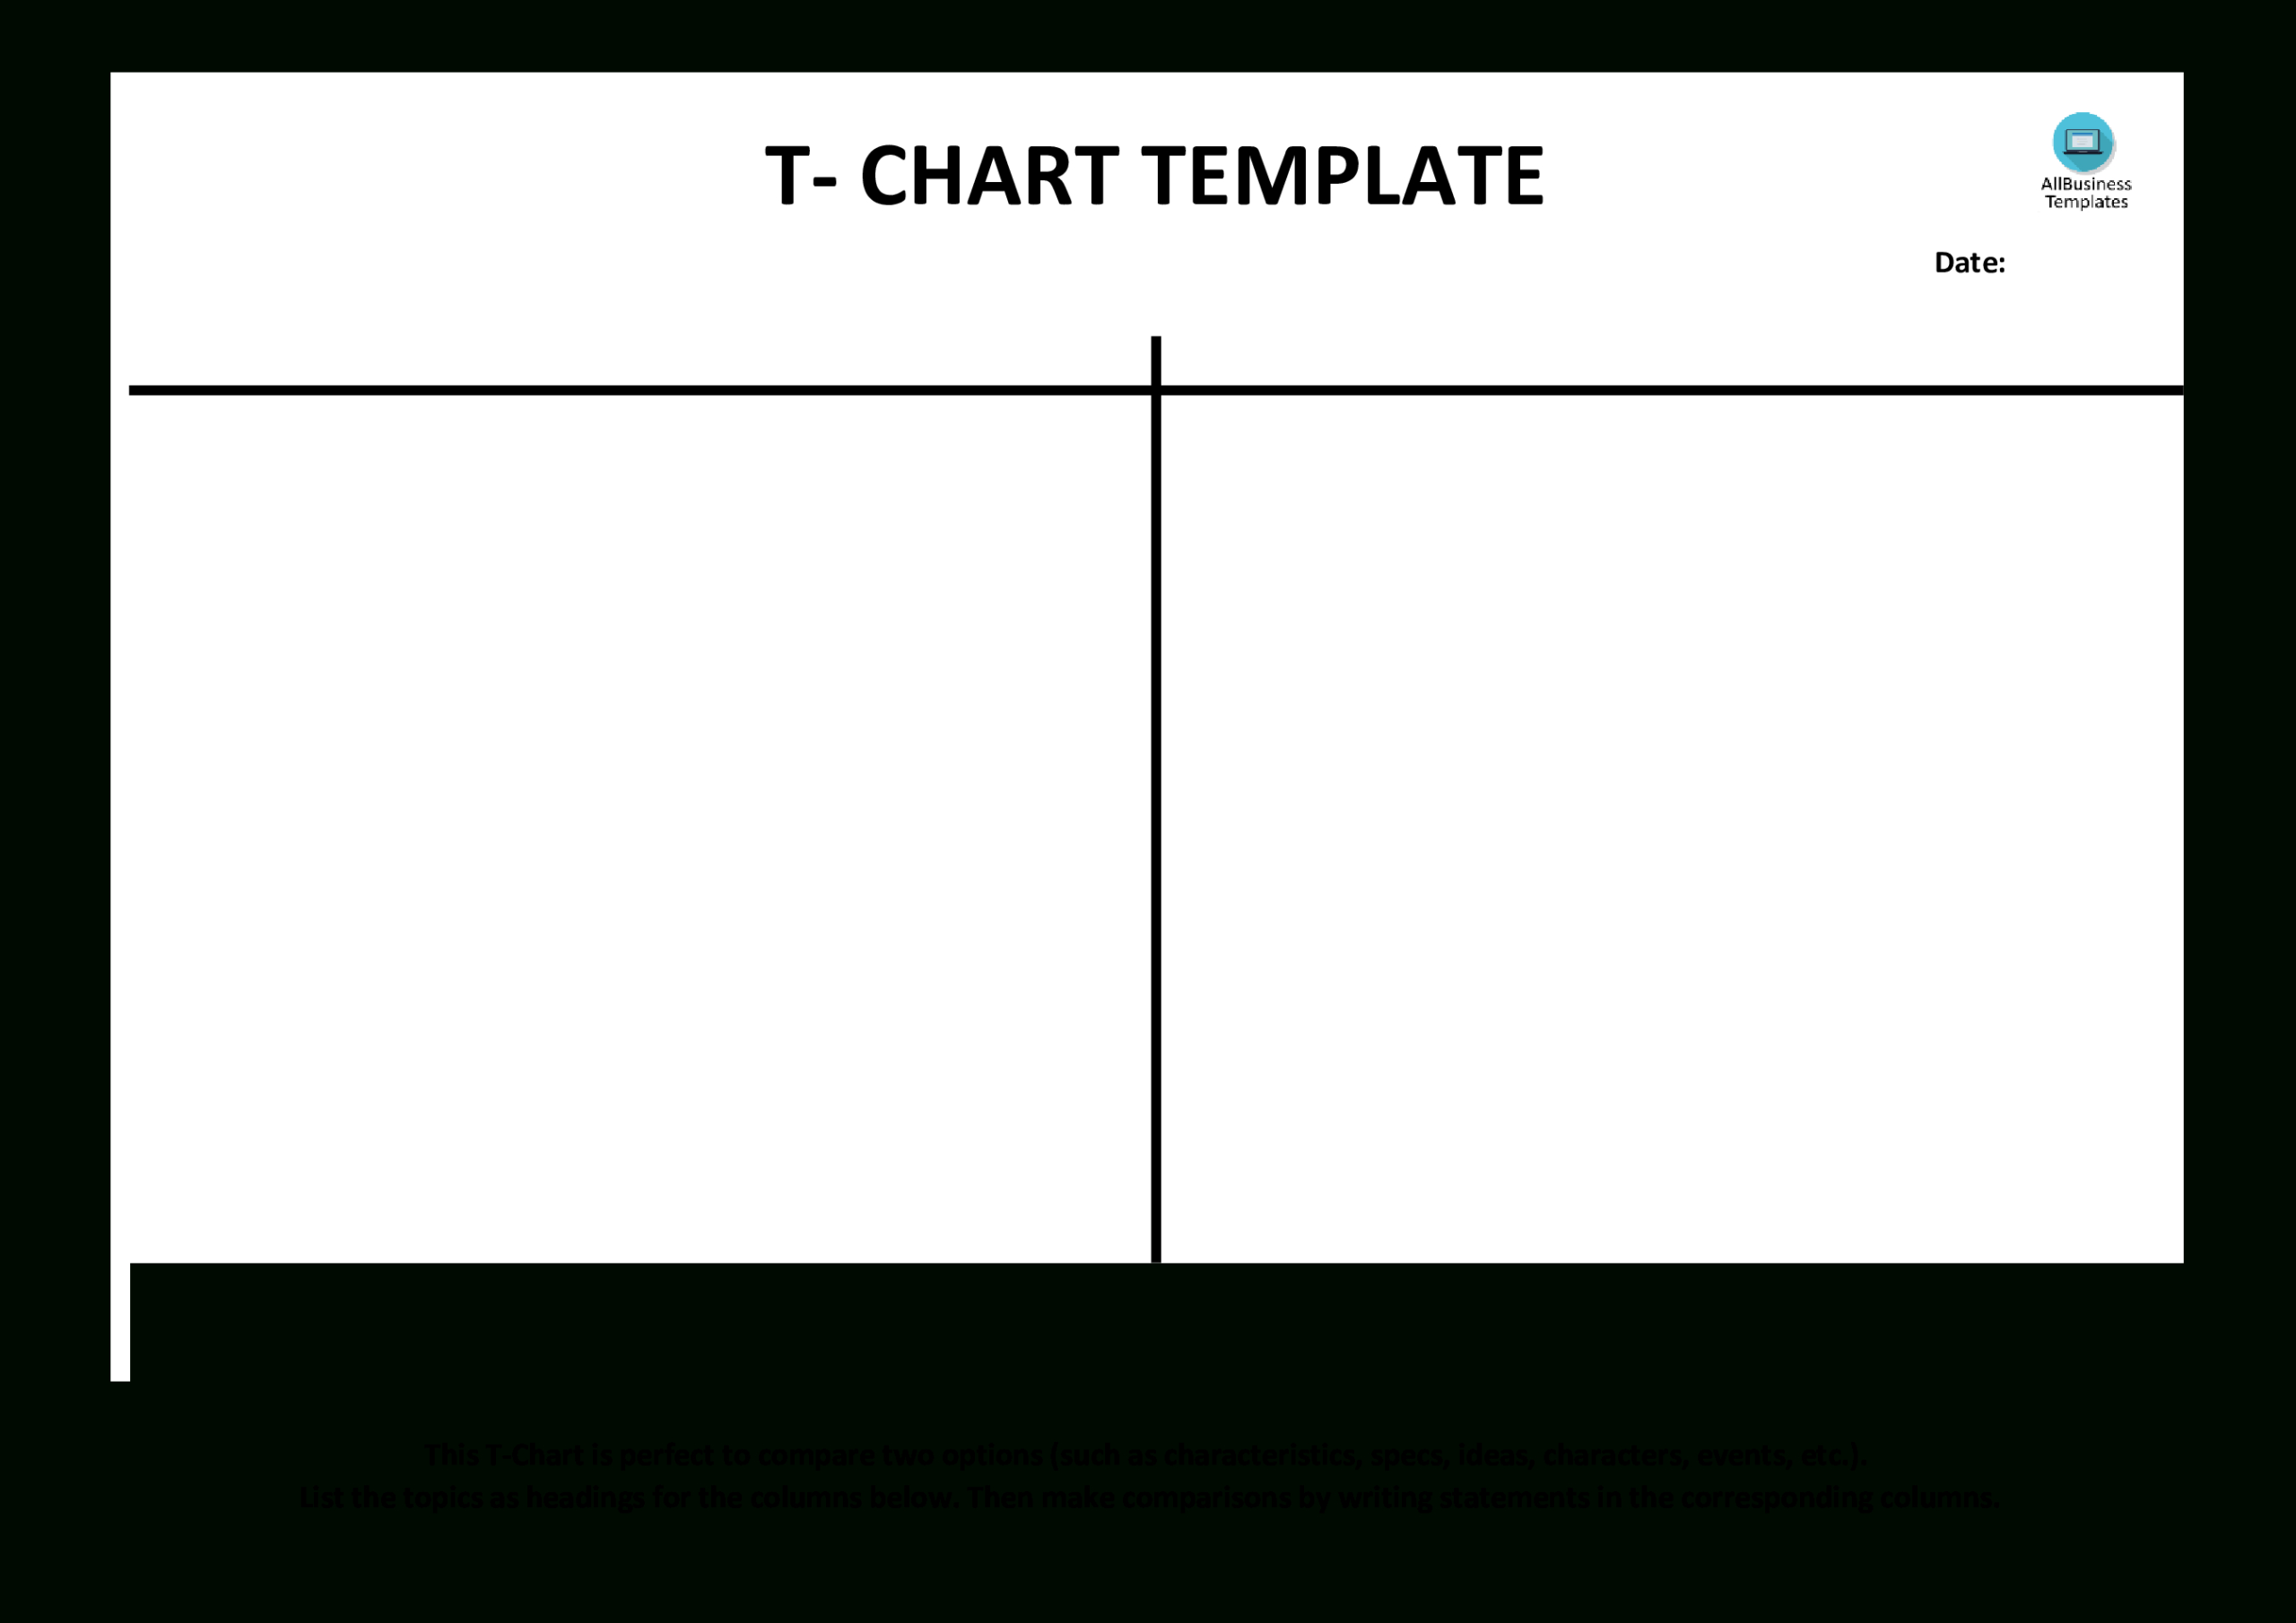 T Chart Example (Blank) | Templates At Allbusinesstemplates Pertaining To T Chart Template For Word